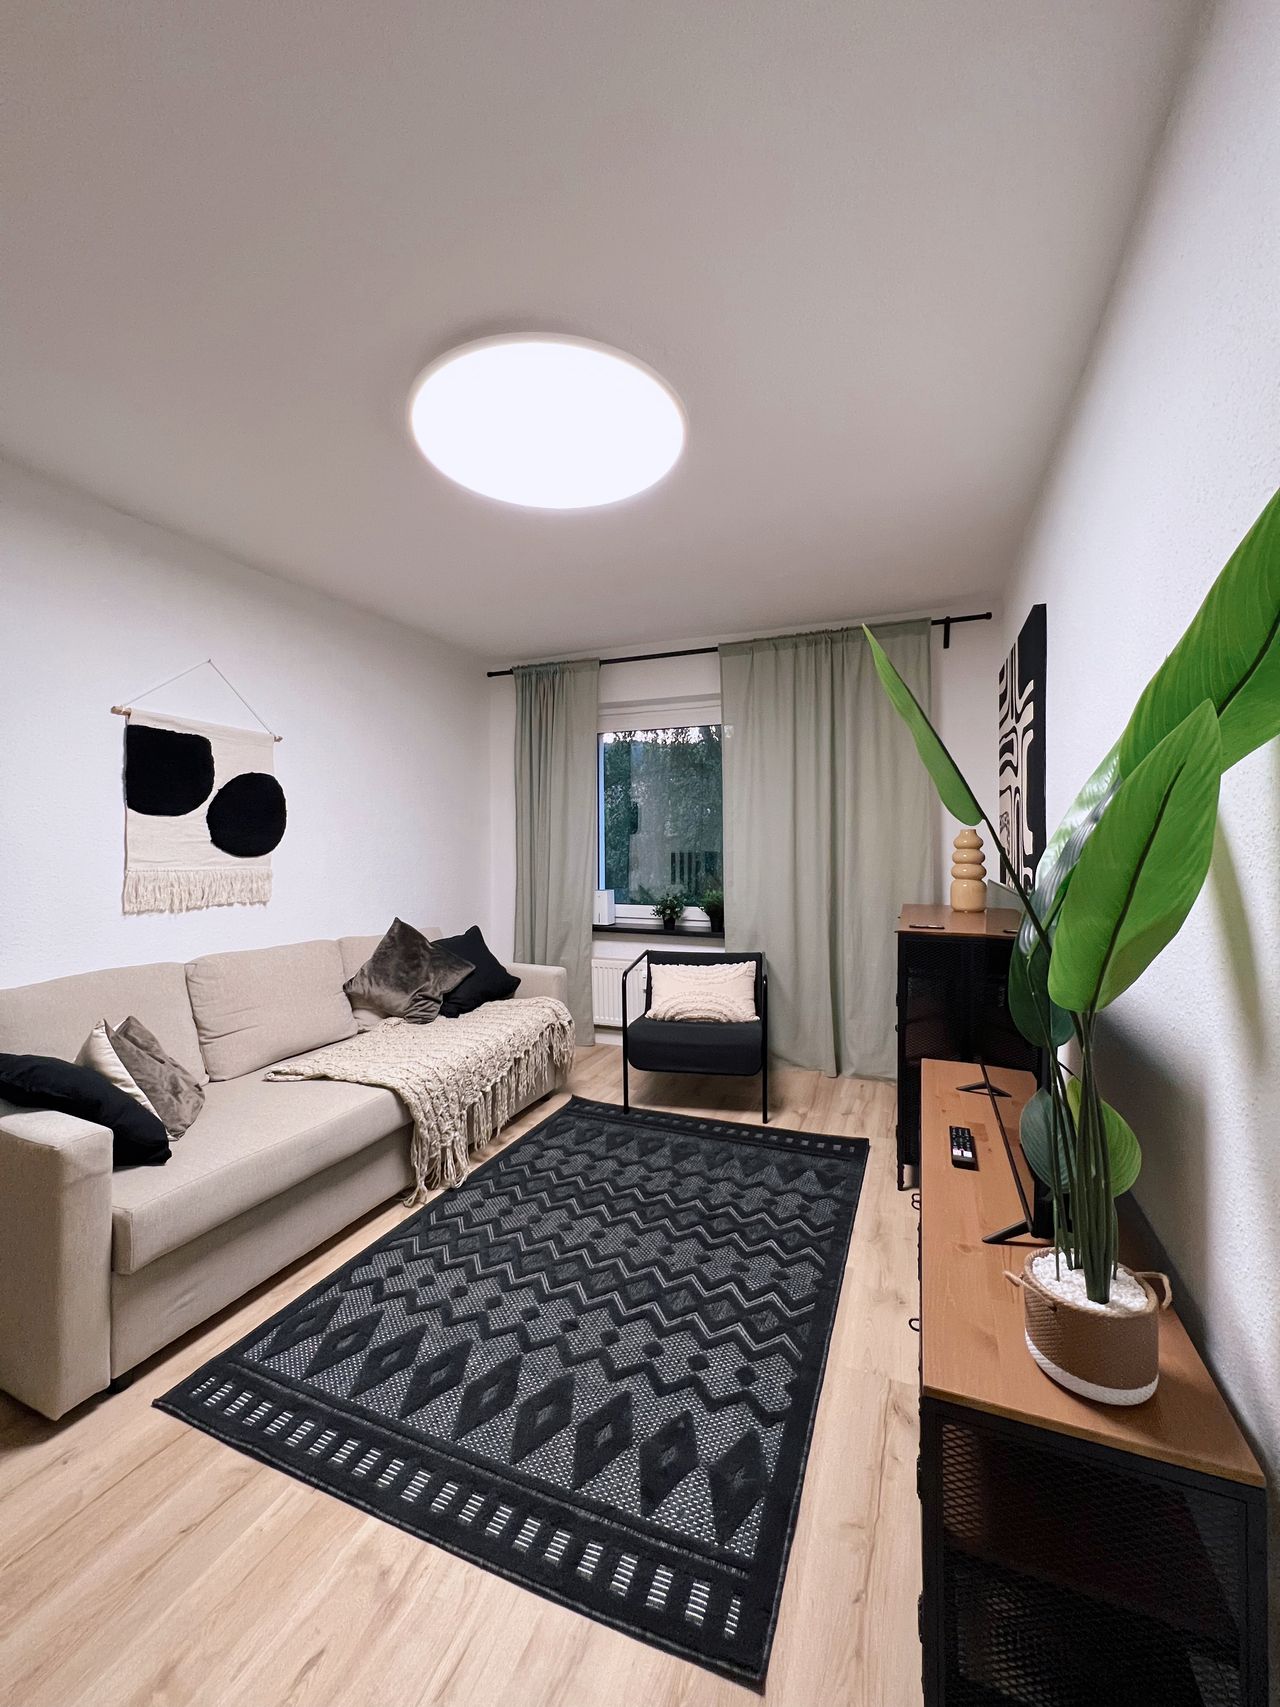 Fully equipped and furnished apartment in Jena City of lights "Urban Jungle"